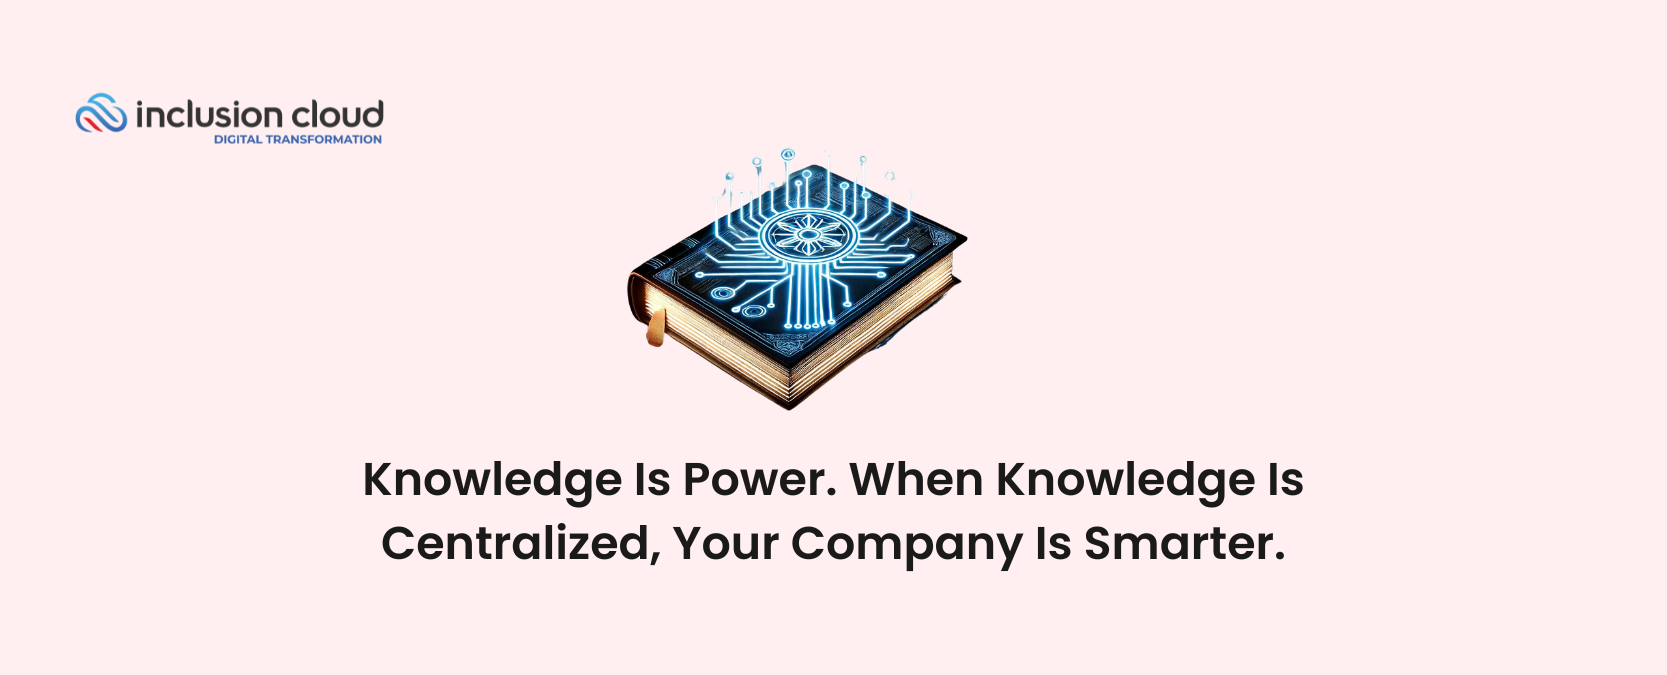 Knowledge Is Power. When Knowledge Is Centralized, Your Company Is Smarter.